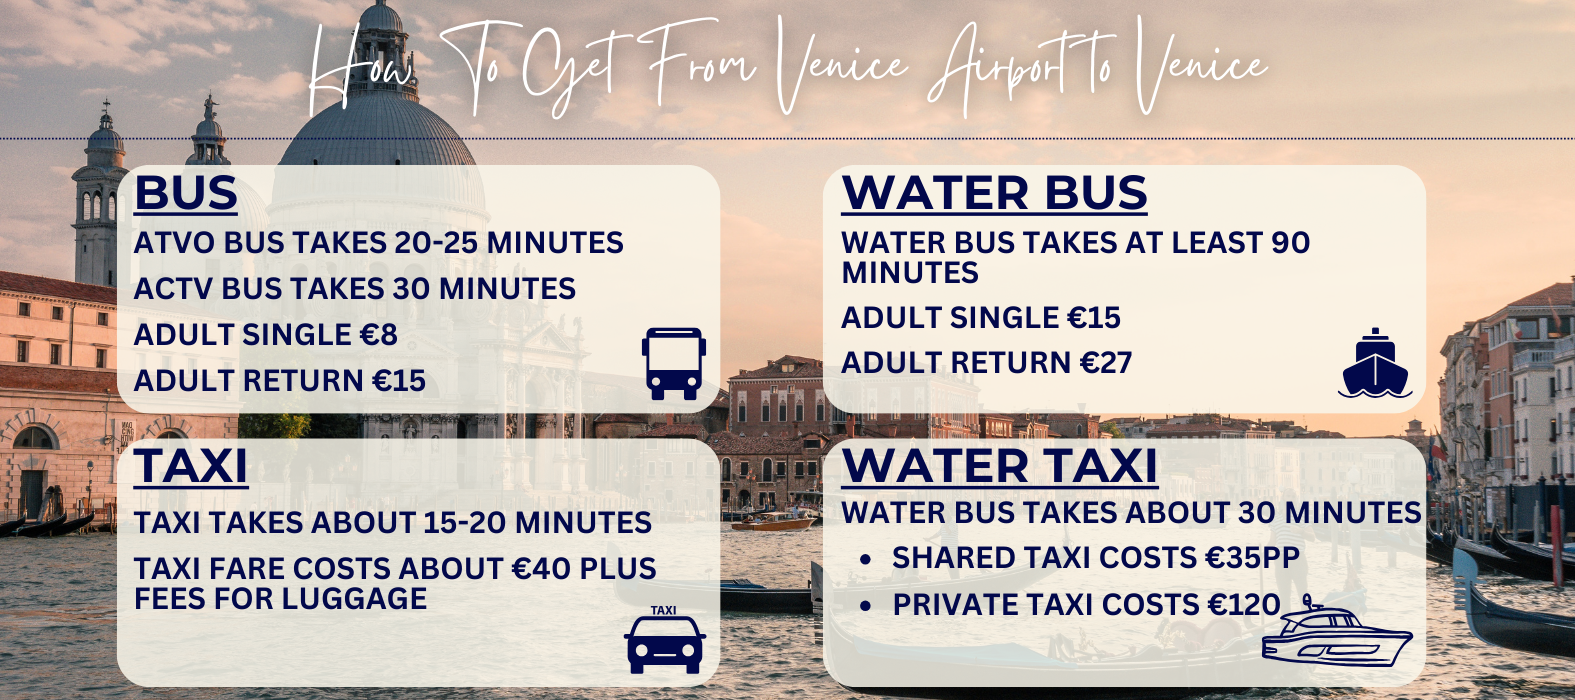 How To Get From Venice Airport To Venice